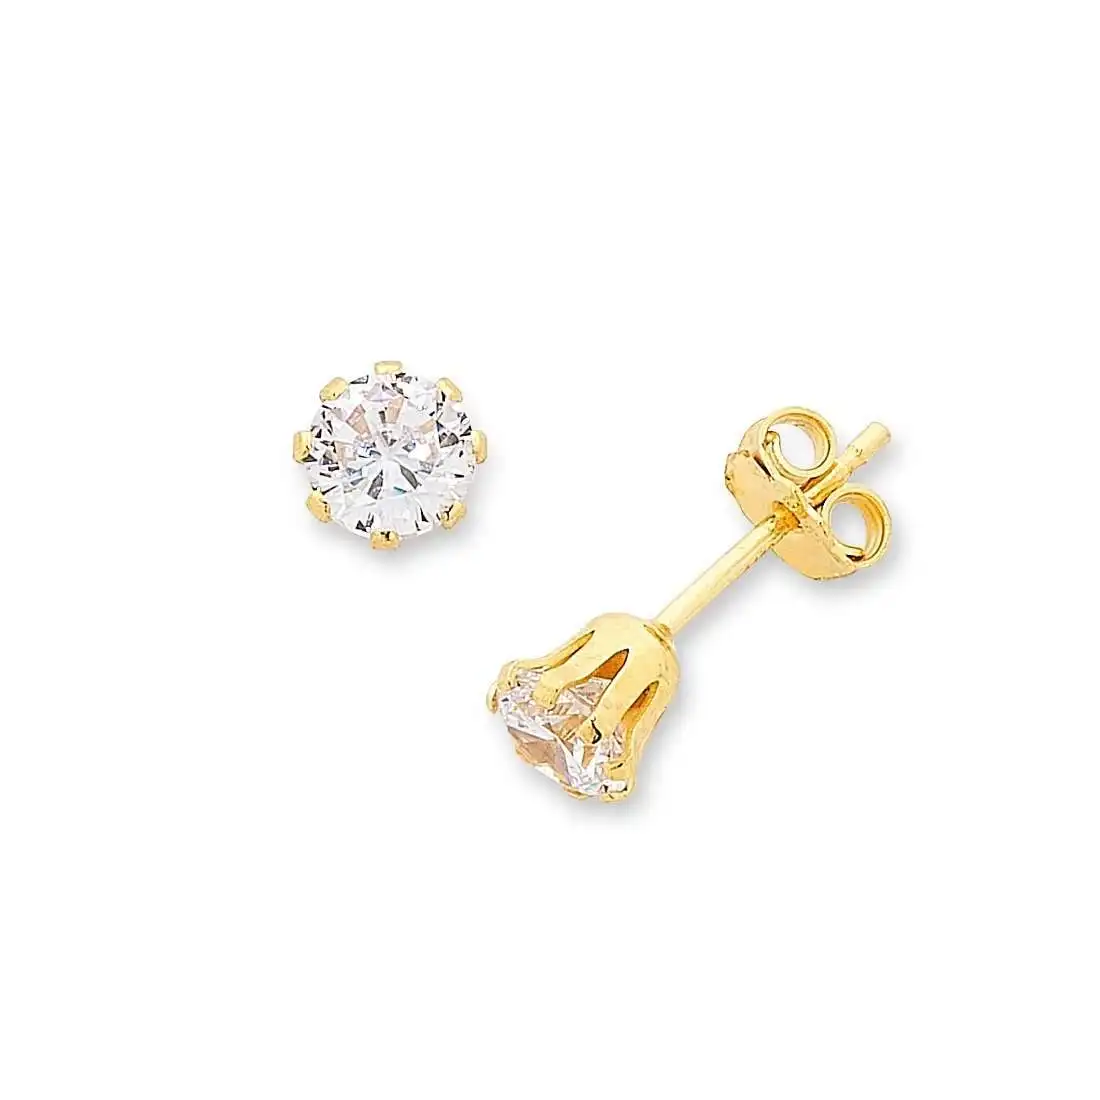 9ct Yellow Gold Silver Infused Cubic Zirconia Stud Earrings - 4mm